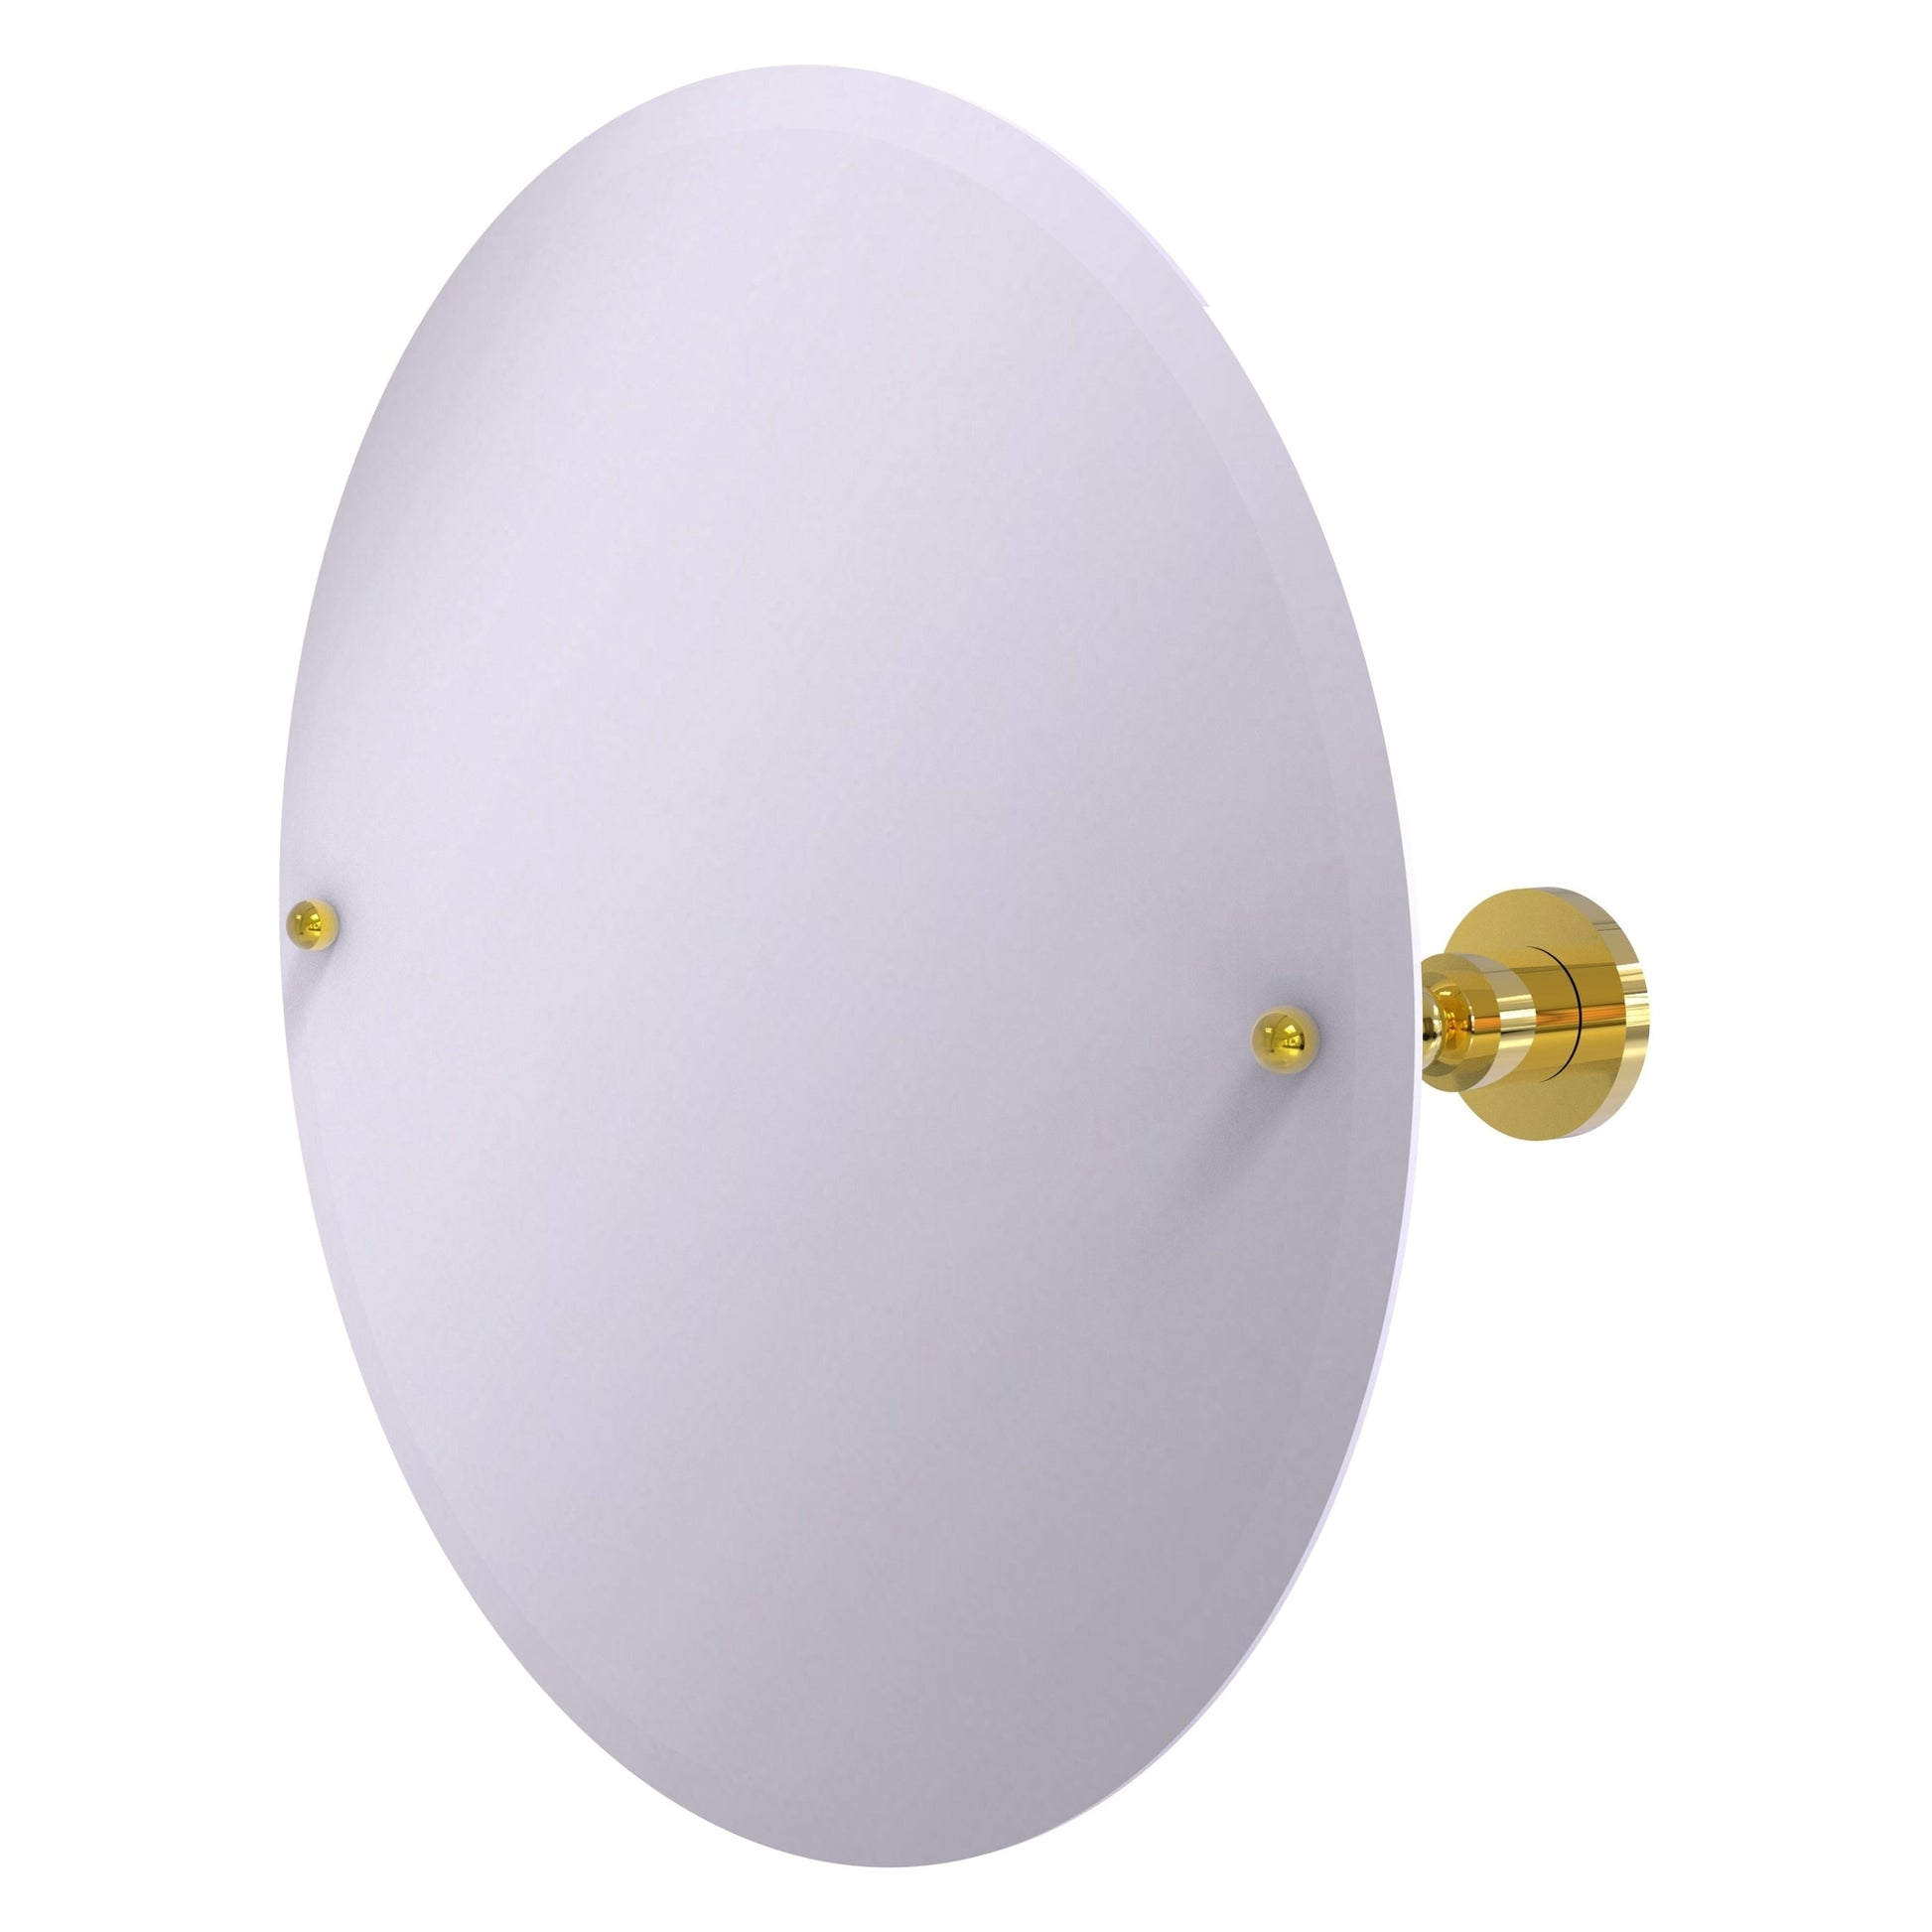 Allied Brass Astor Place 22" x 22" Polished Brass Solid Brass Frameless Round Tilt Mirror With Beveled Edge